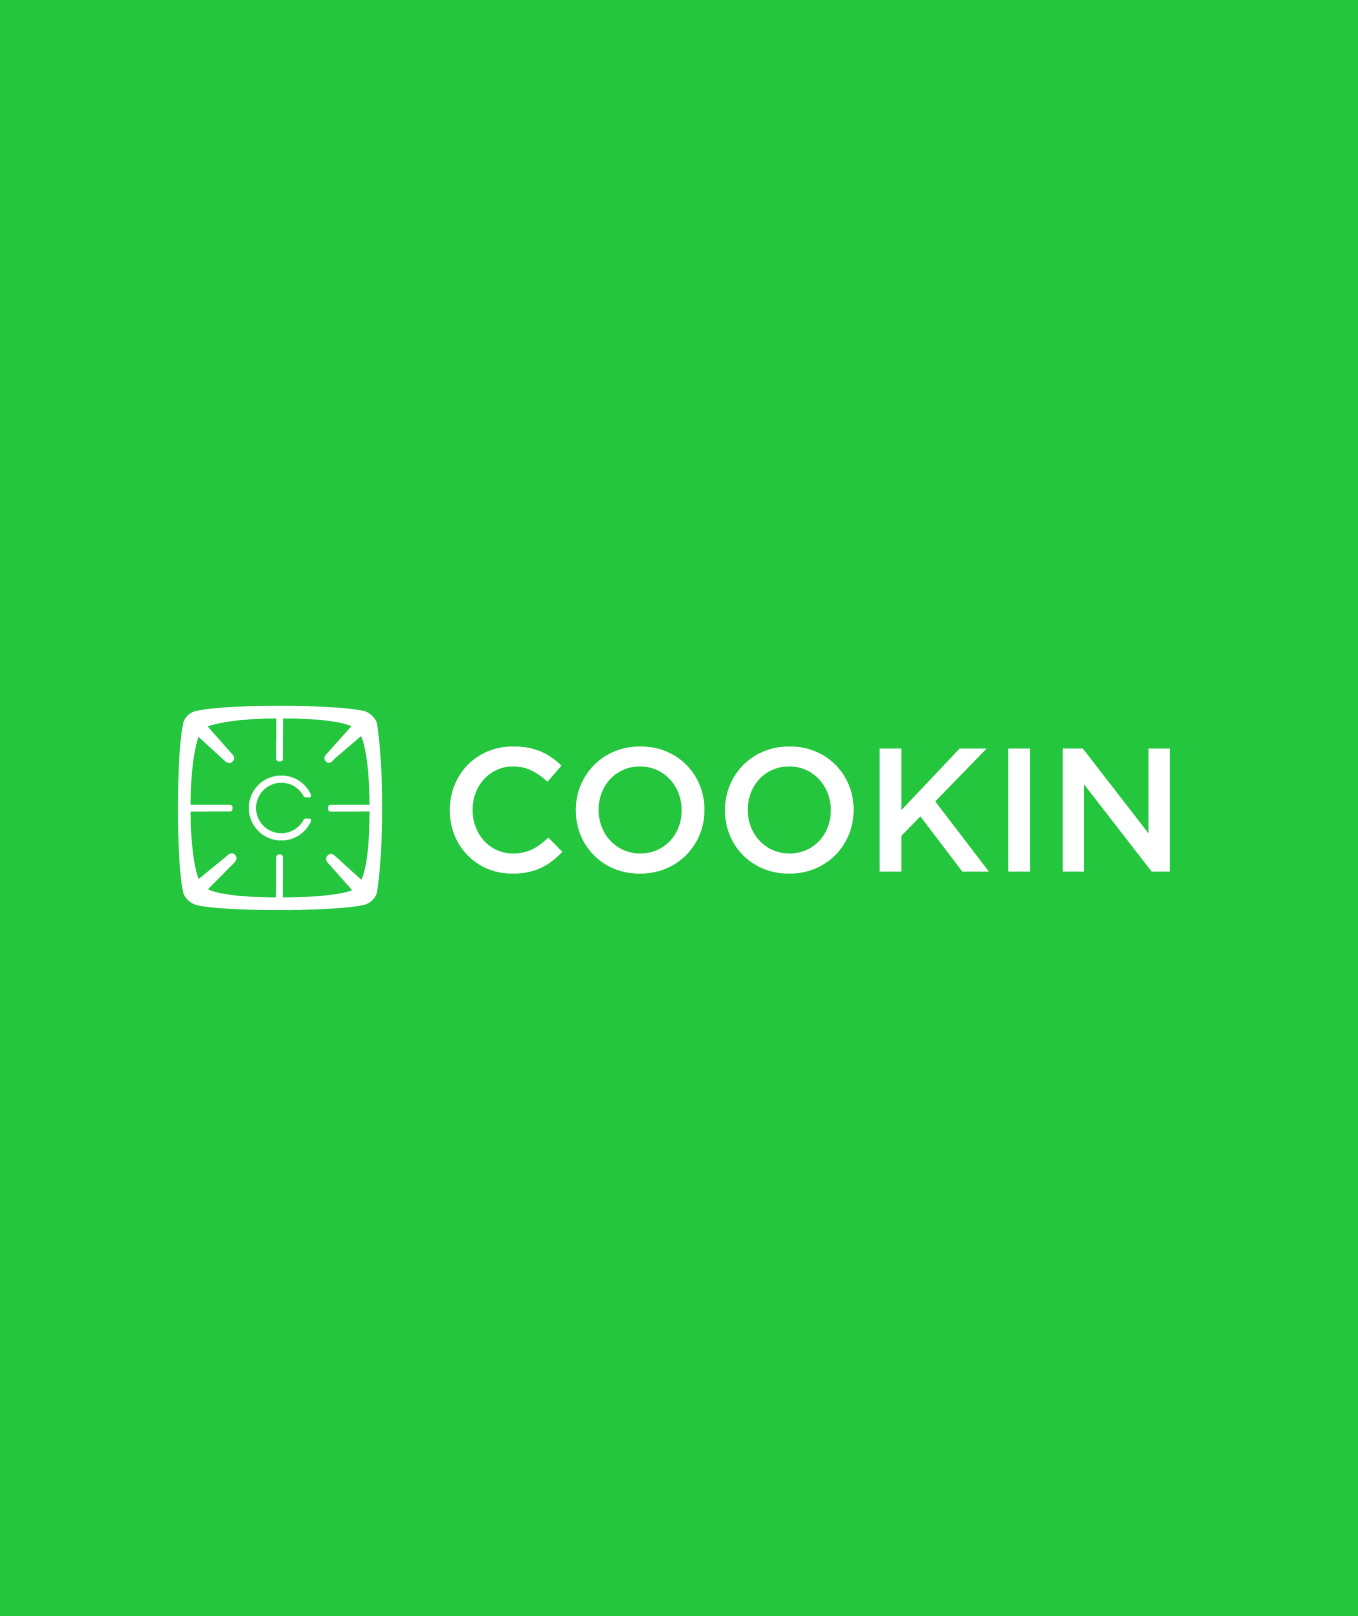 Cooking intimidates beginners. Cookin was a less formal, easier, more relaxed way to start. The logo is an interpretation of a single stove burner as all of our recipes were one-pan or one-pot.